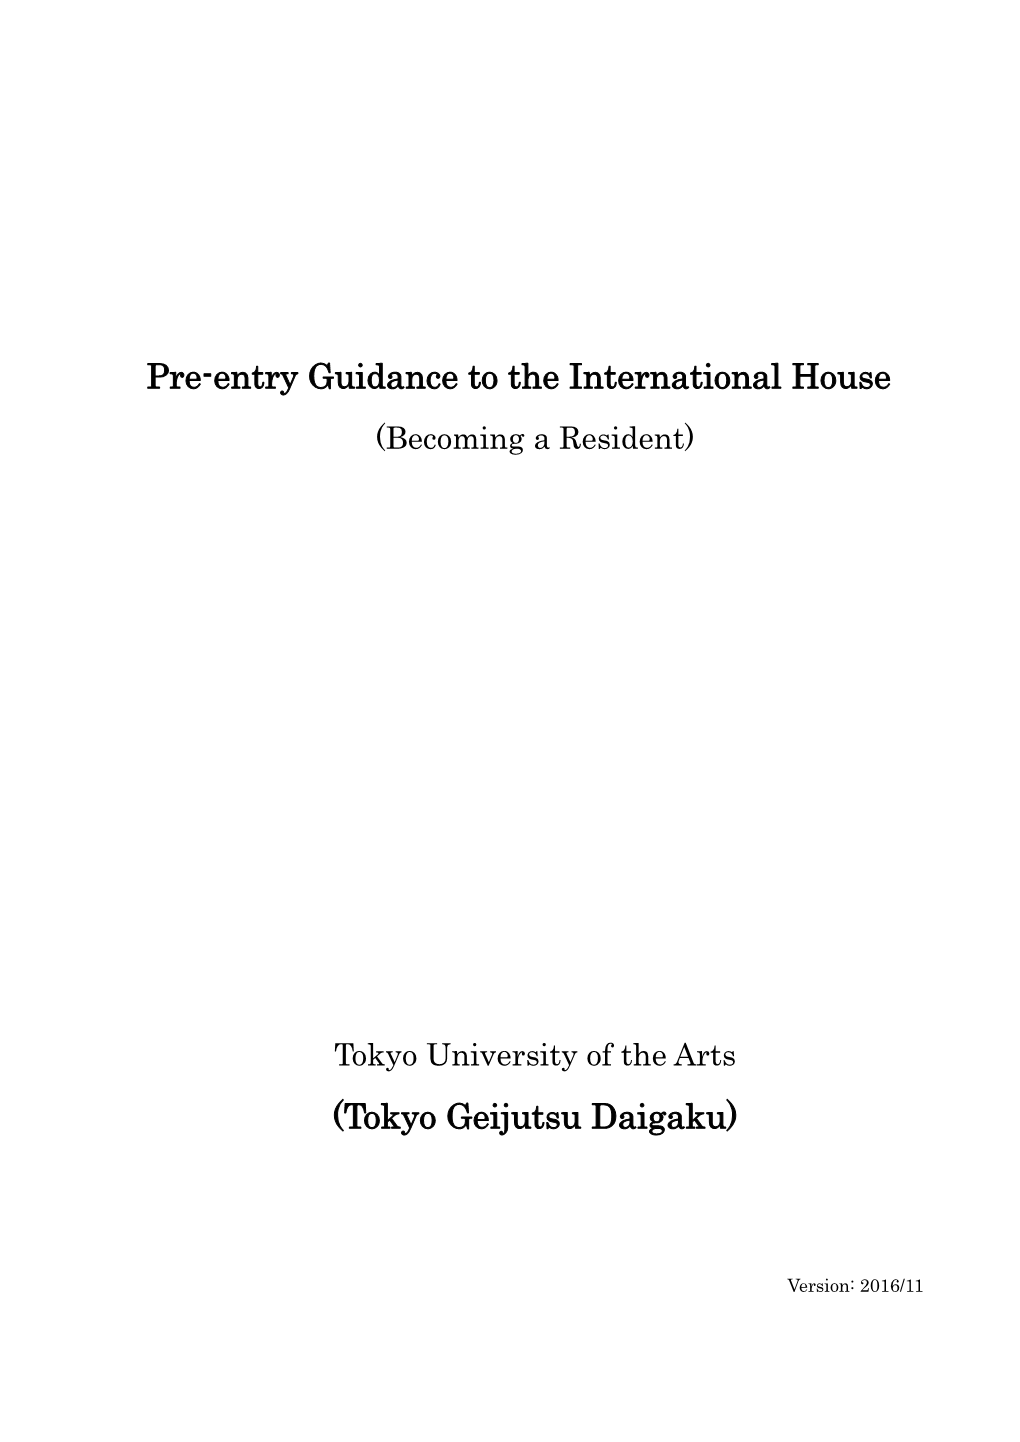 Guidance to Enter the International House